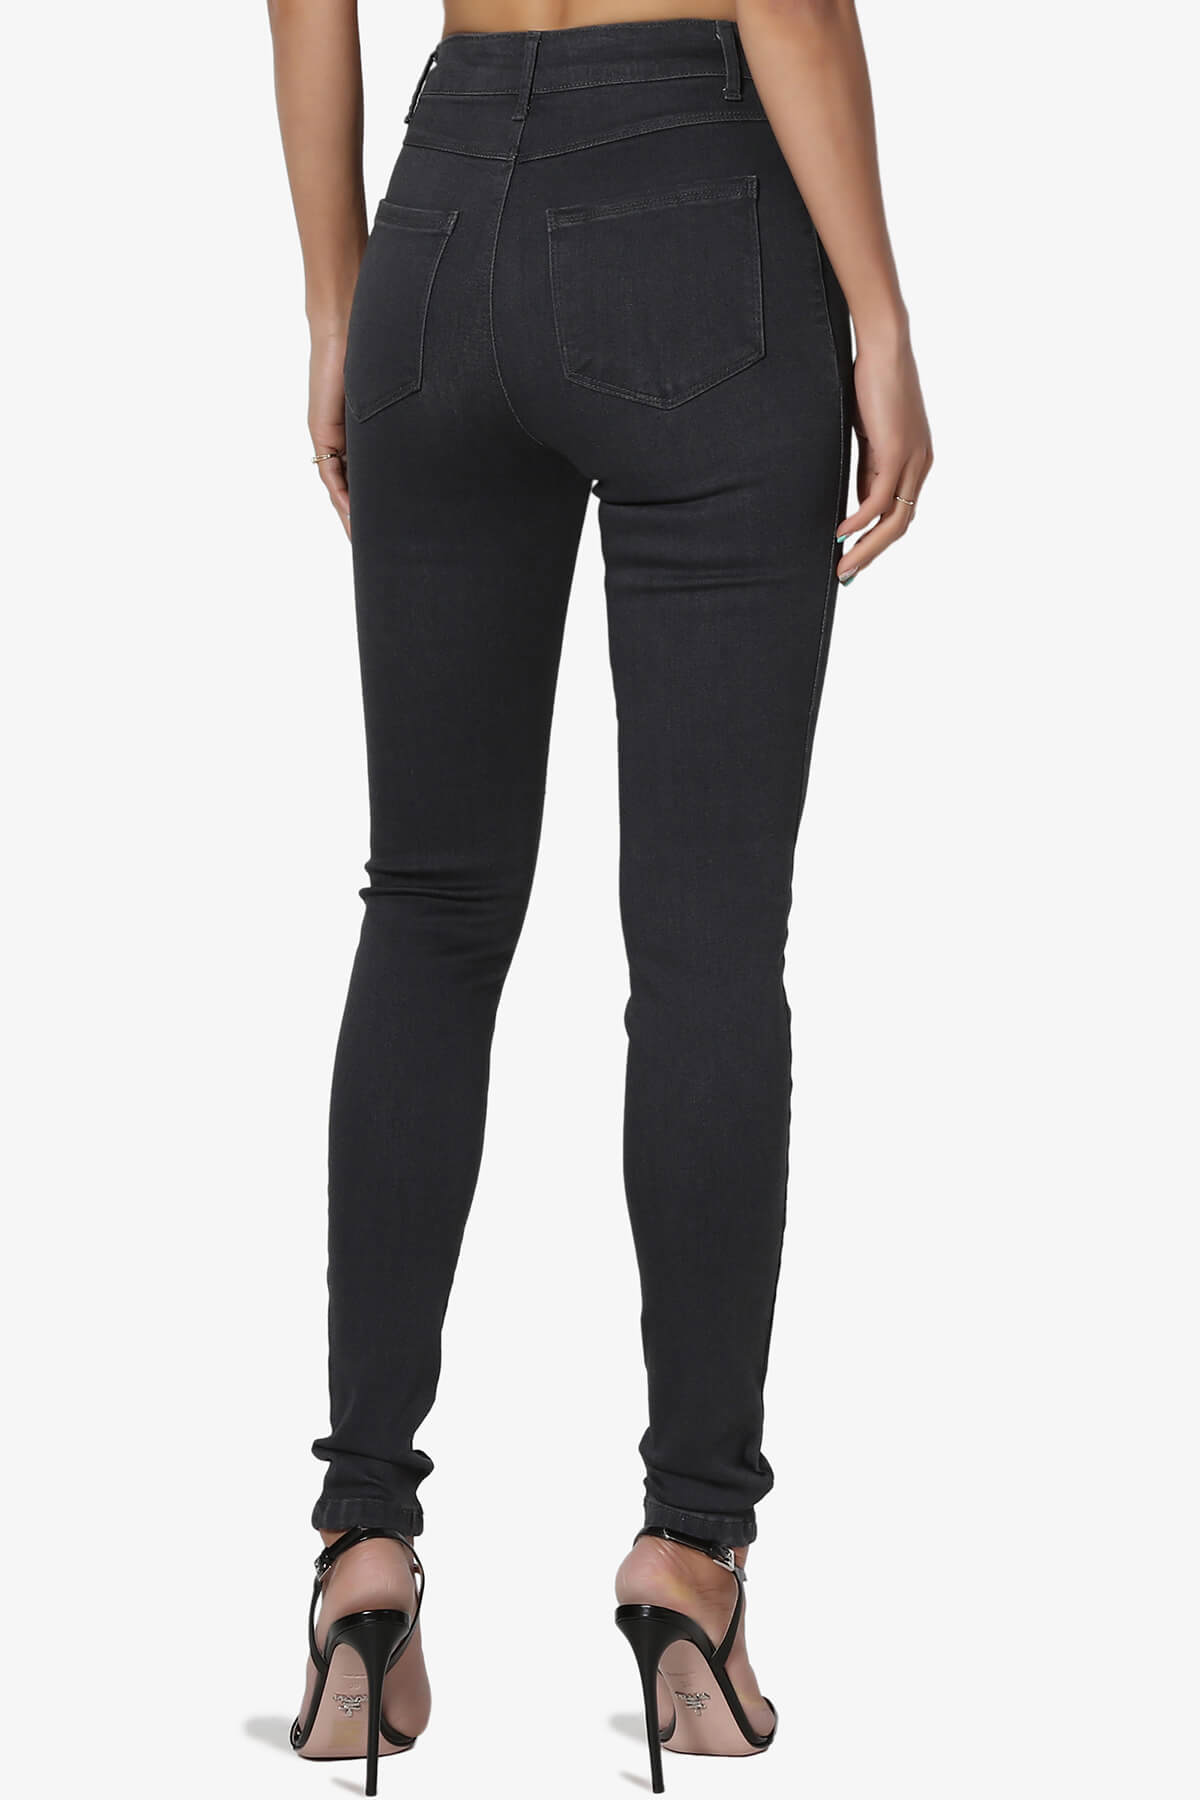 Load image into Gallery viewer, Doris High Rise Skinny Jeans DARK GREY_2
